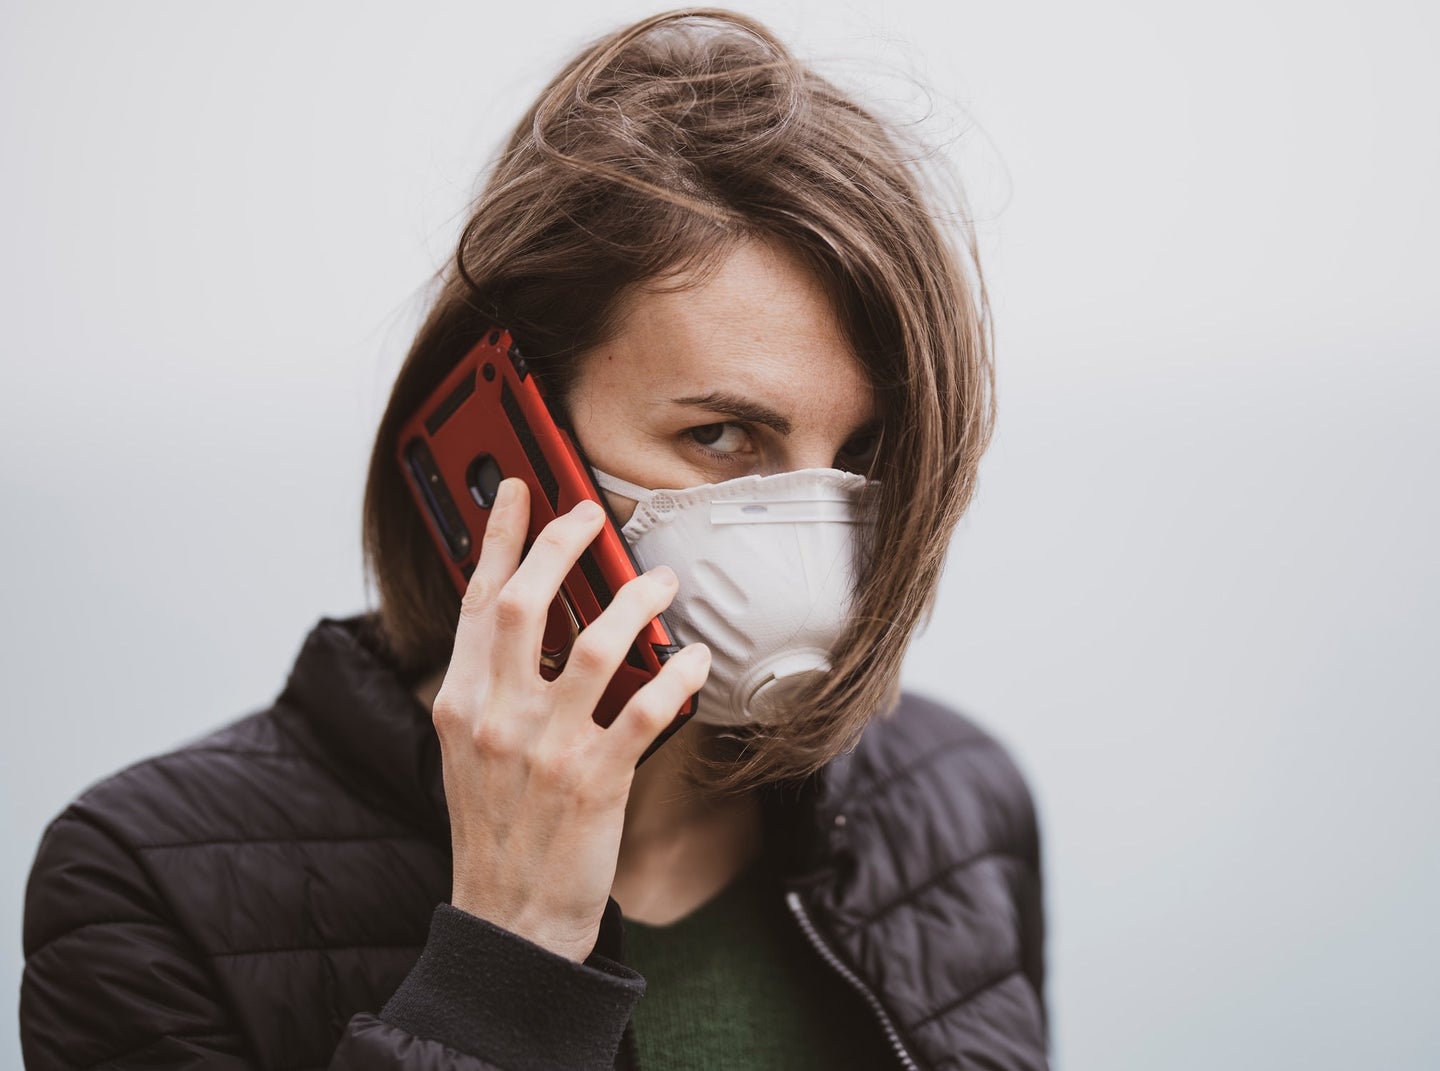 a woman is talking on the phone while wearing a protective face mask. The mask is white and has a plastic valve on the front of it.